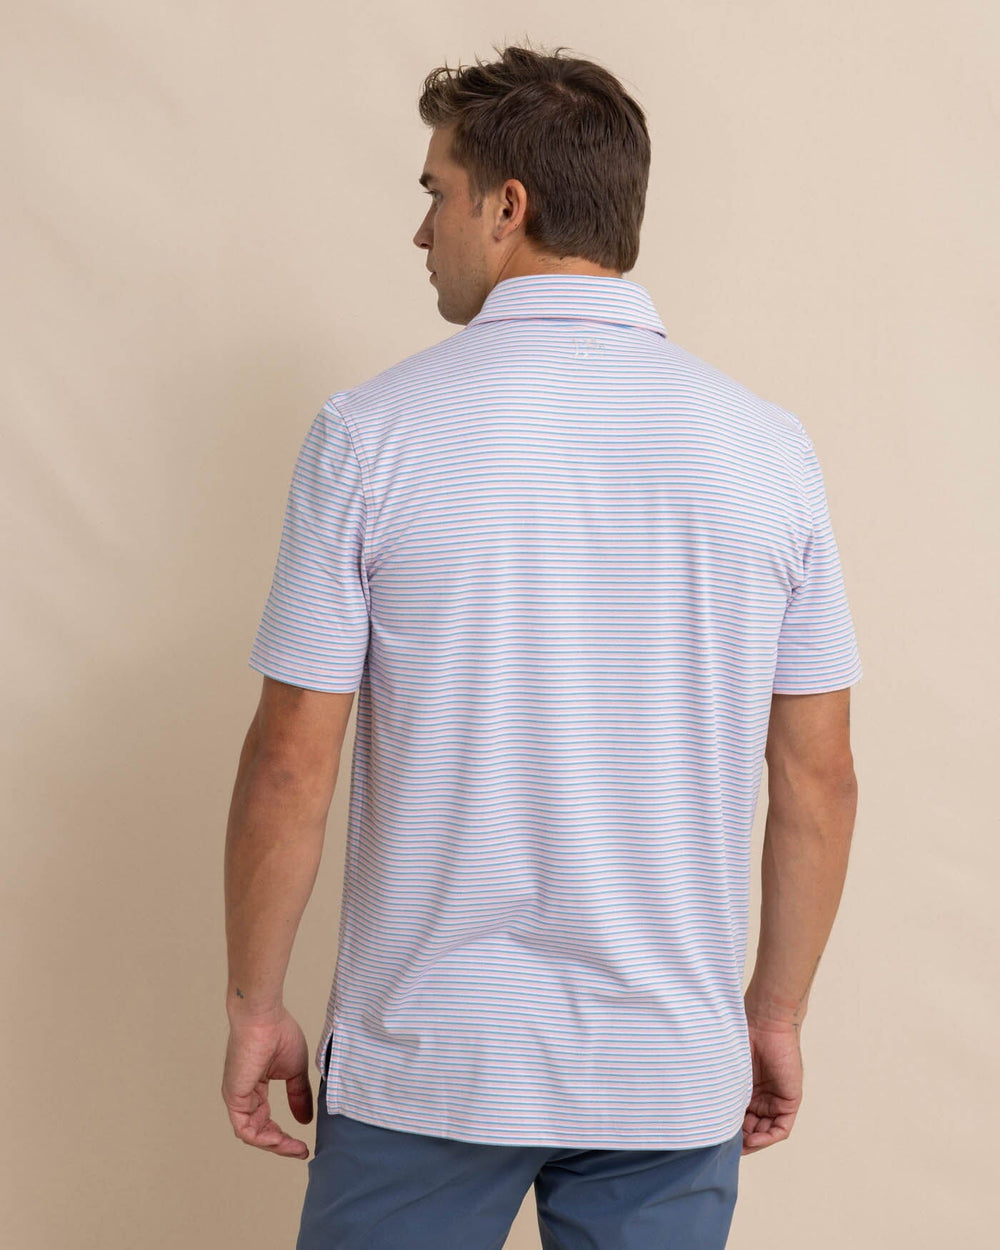 The back view of the Southern Tide Ryder Heather Halls Performance Polo by Southern Tide - Heather Pale Rosette Pink